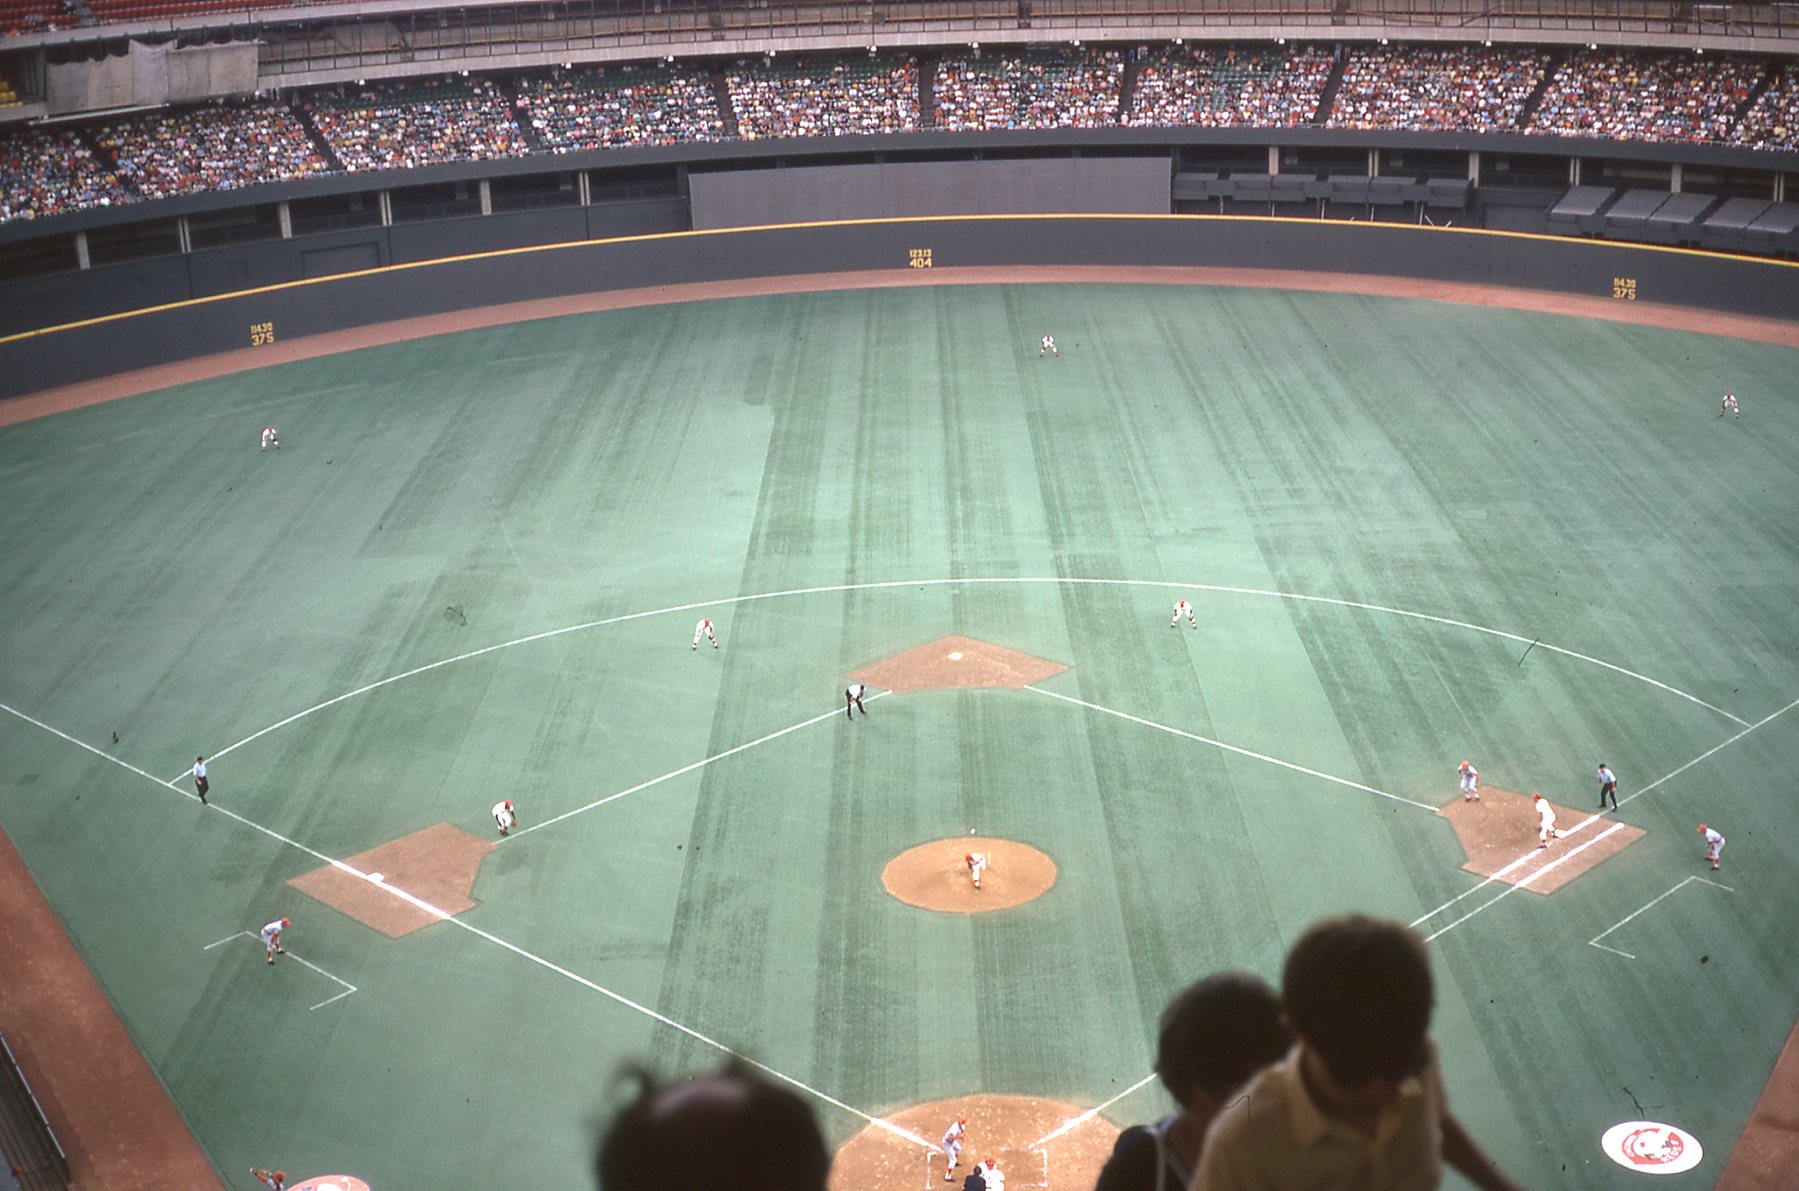 April 17, 1976: Bees swarm Riverfront as Reds swamp Giants, 11-0